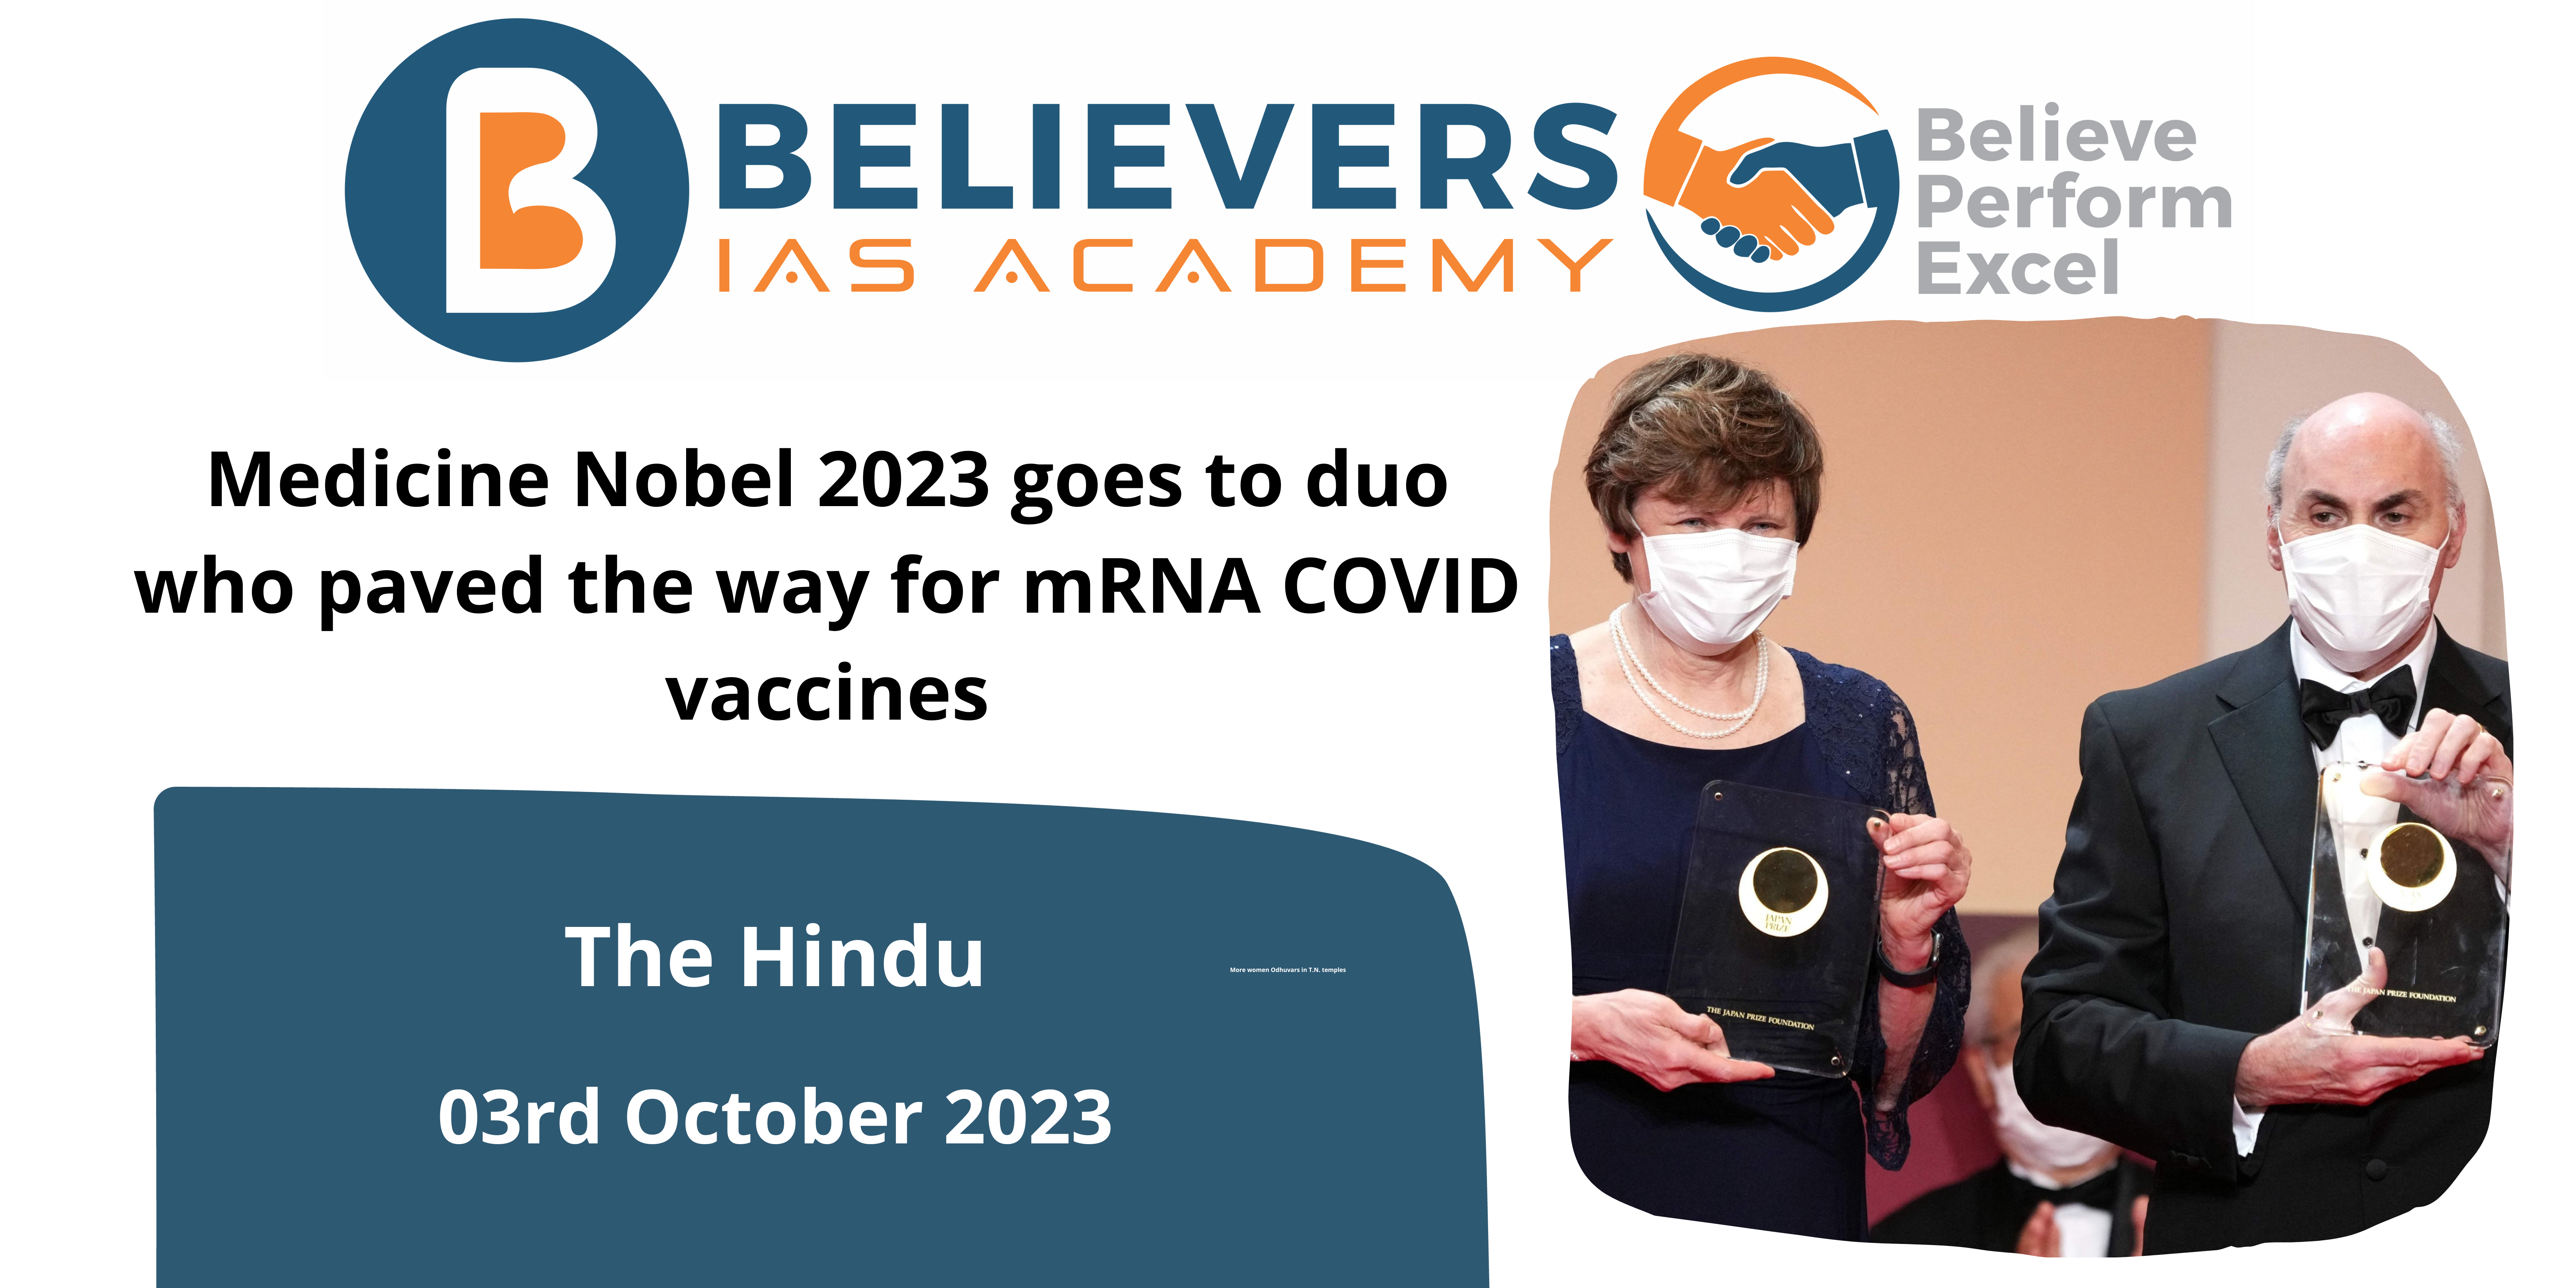 Medicine Nobel 2023 goes to duo who paved the way for mRNA COVID vaccines